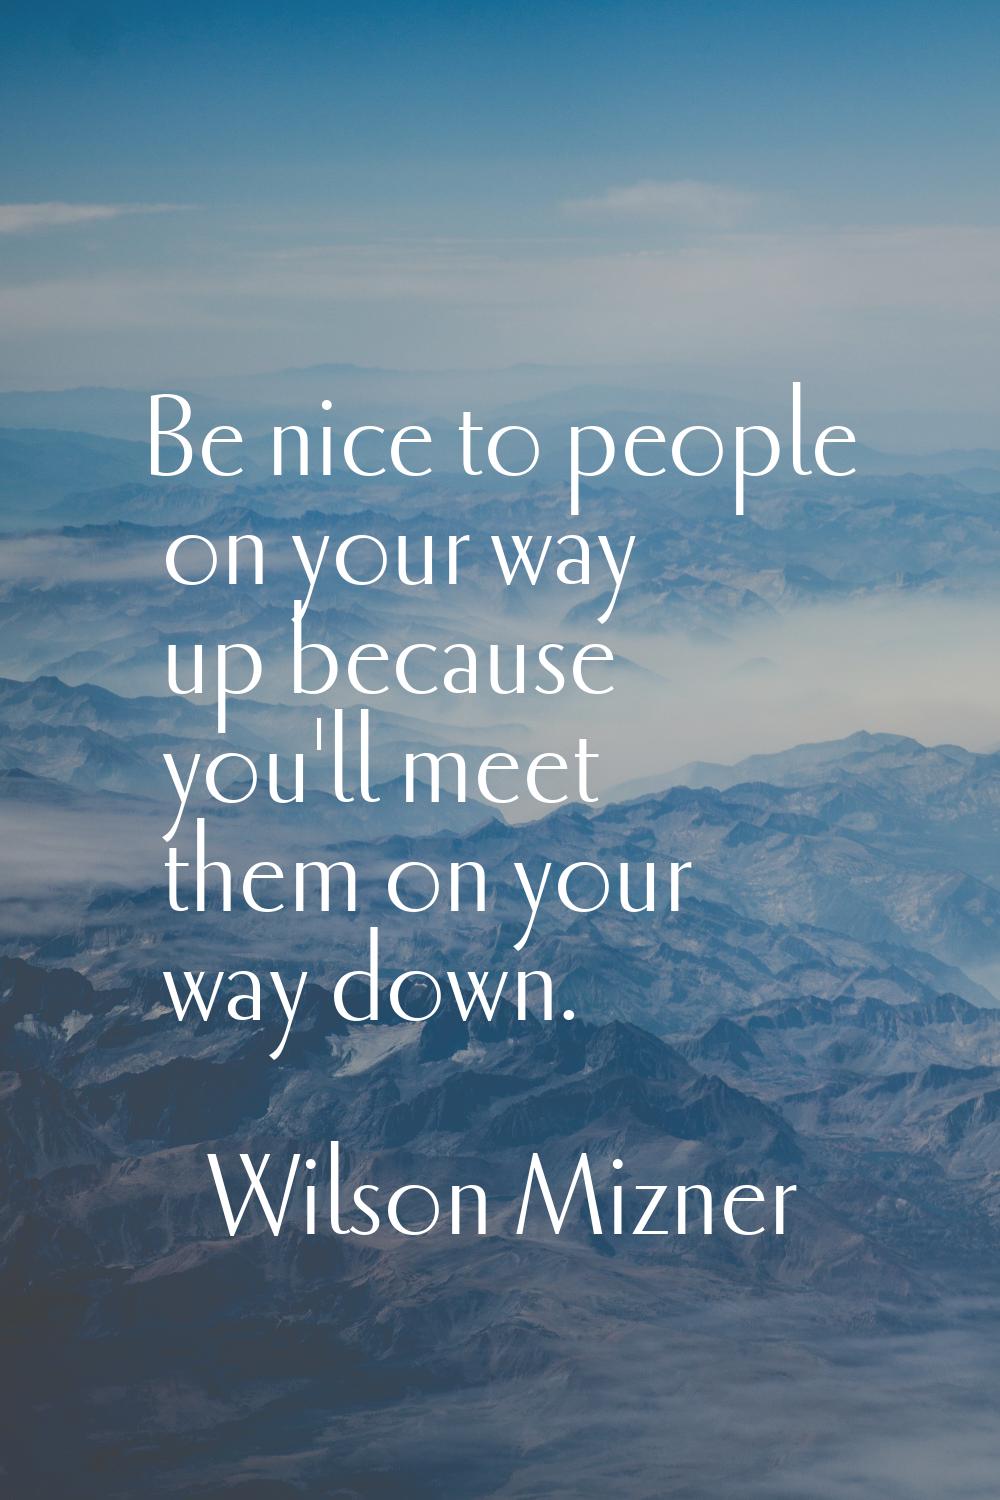 Be nice to people on your way up because you'll meet them on your way down.